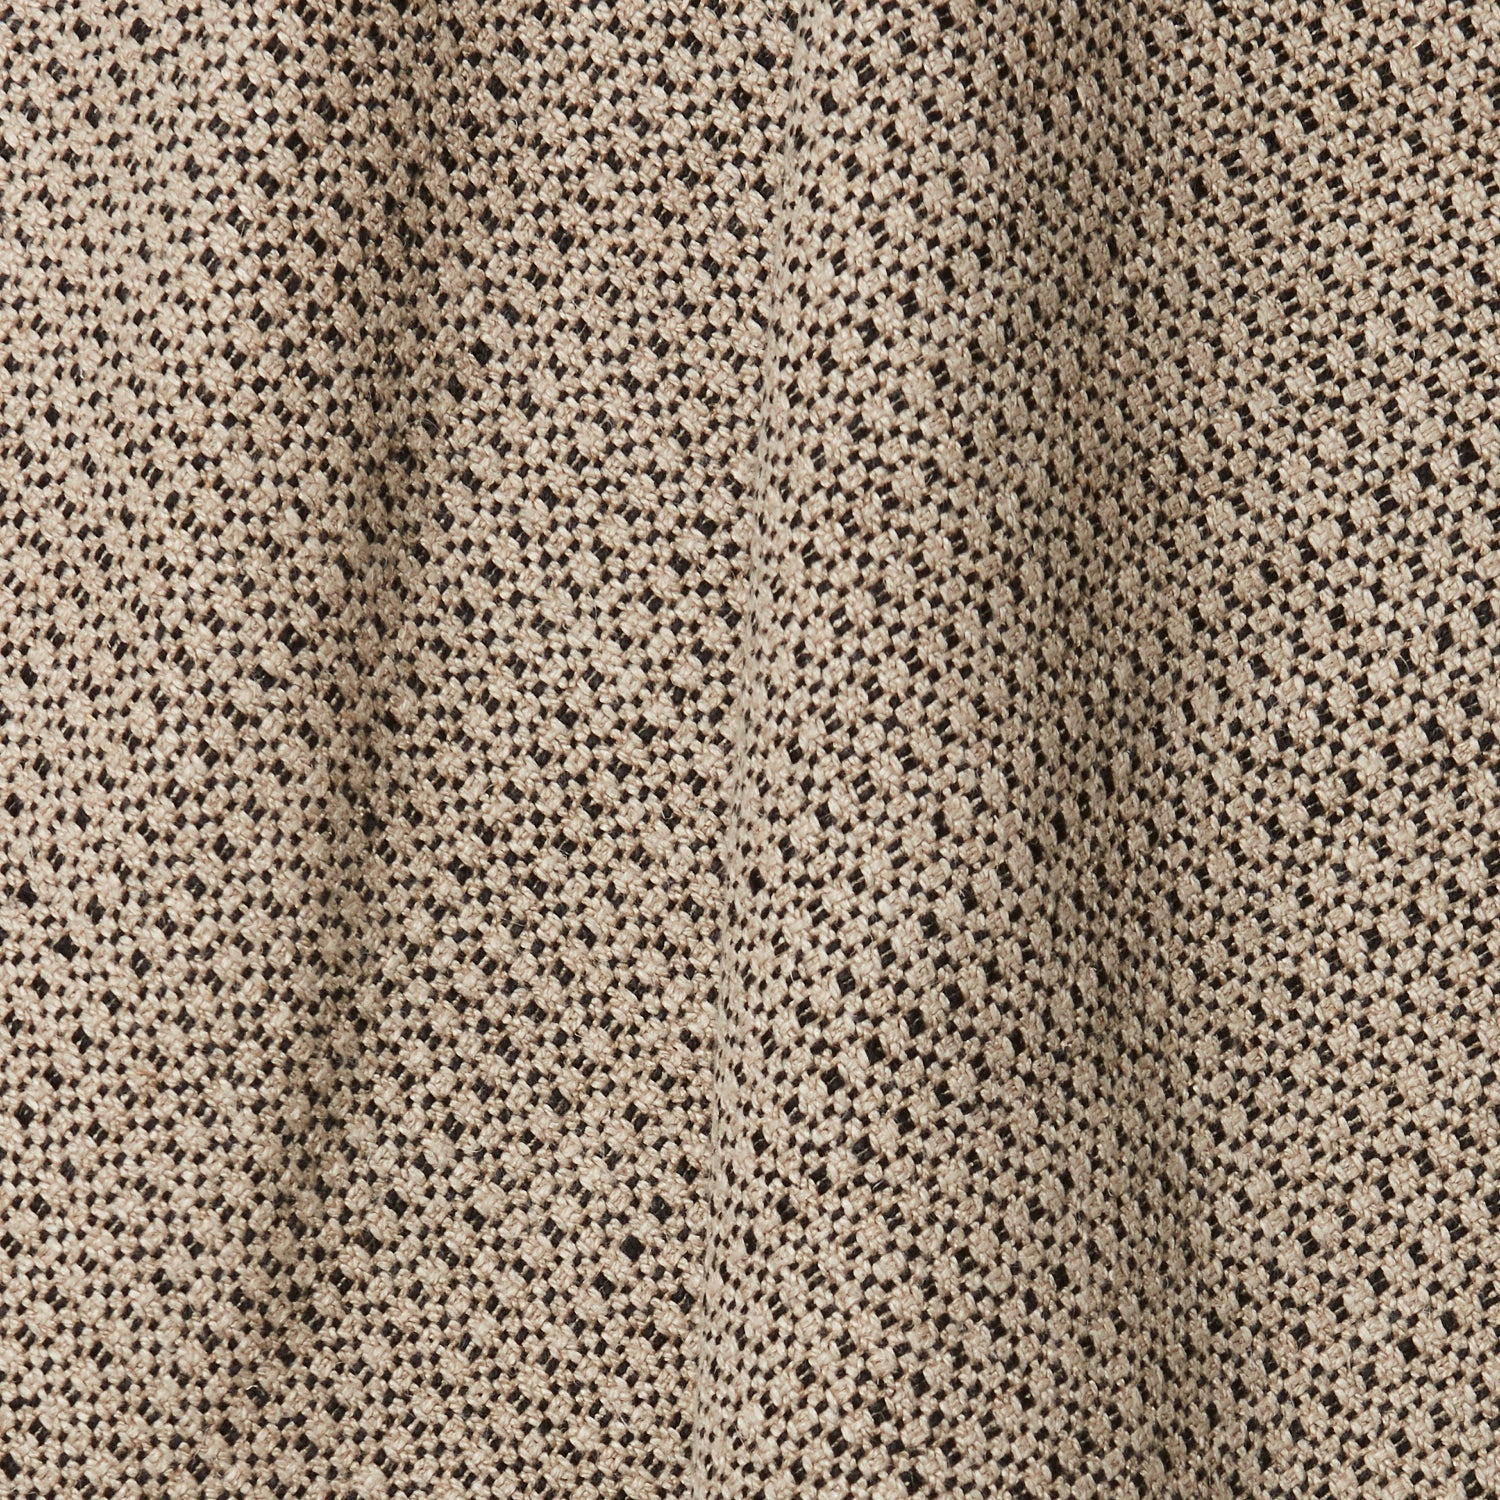 A draped swatch of linen fabric in a small-scale dotted pattern in tan and dark brown.